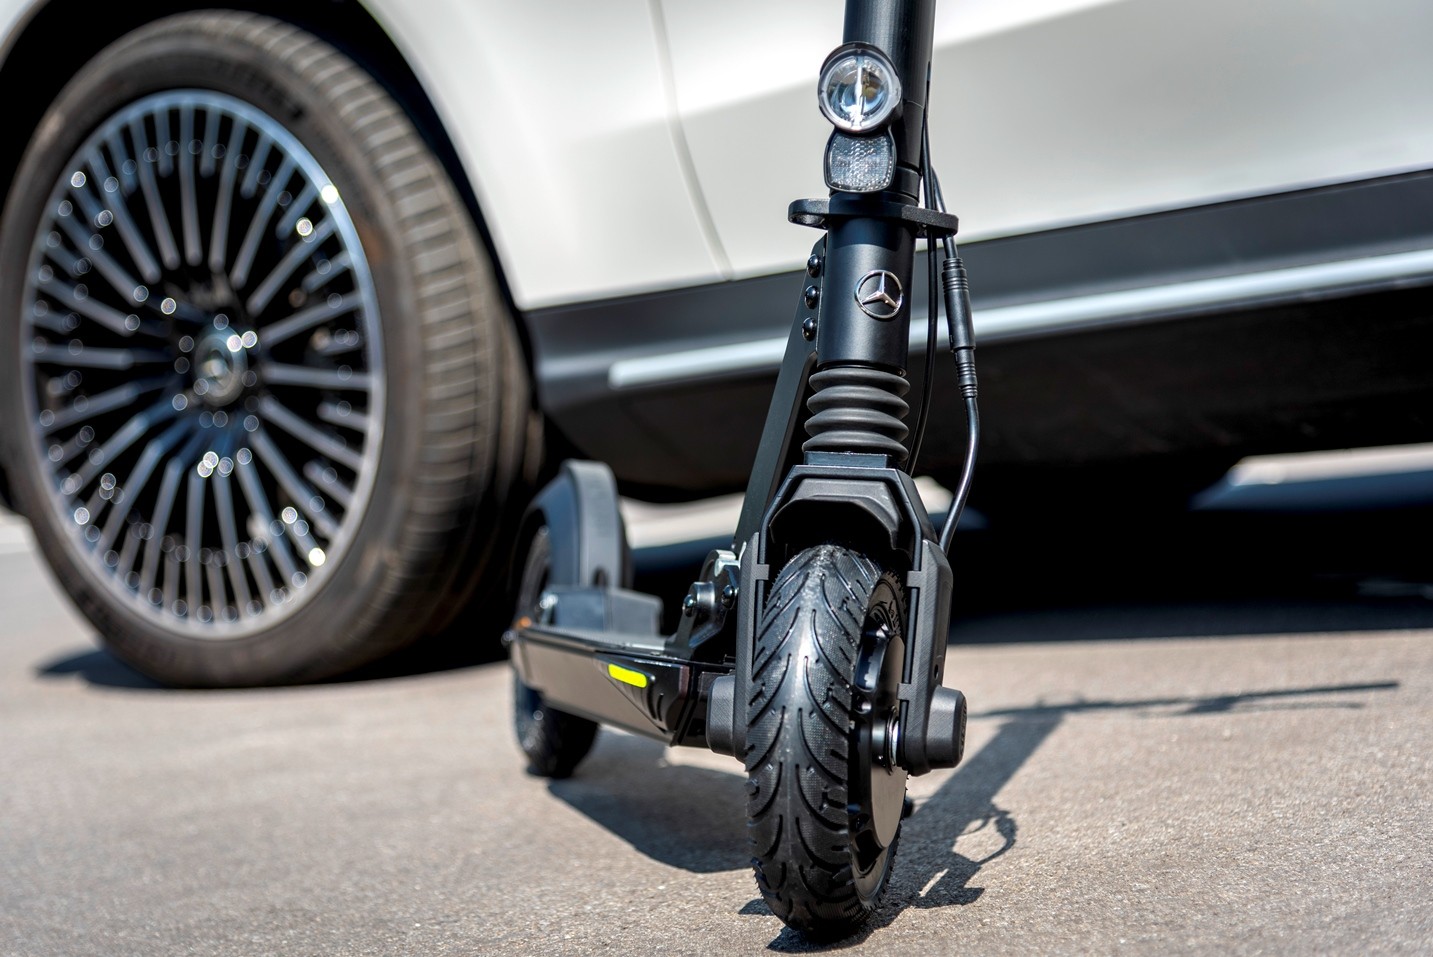 mercedes-benz-eq-e-scooter-rolls-out-with-25-kilometer-range-3.jpg